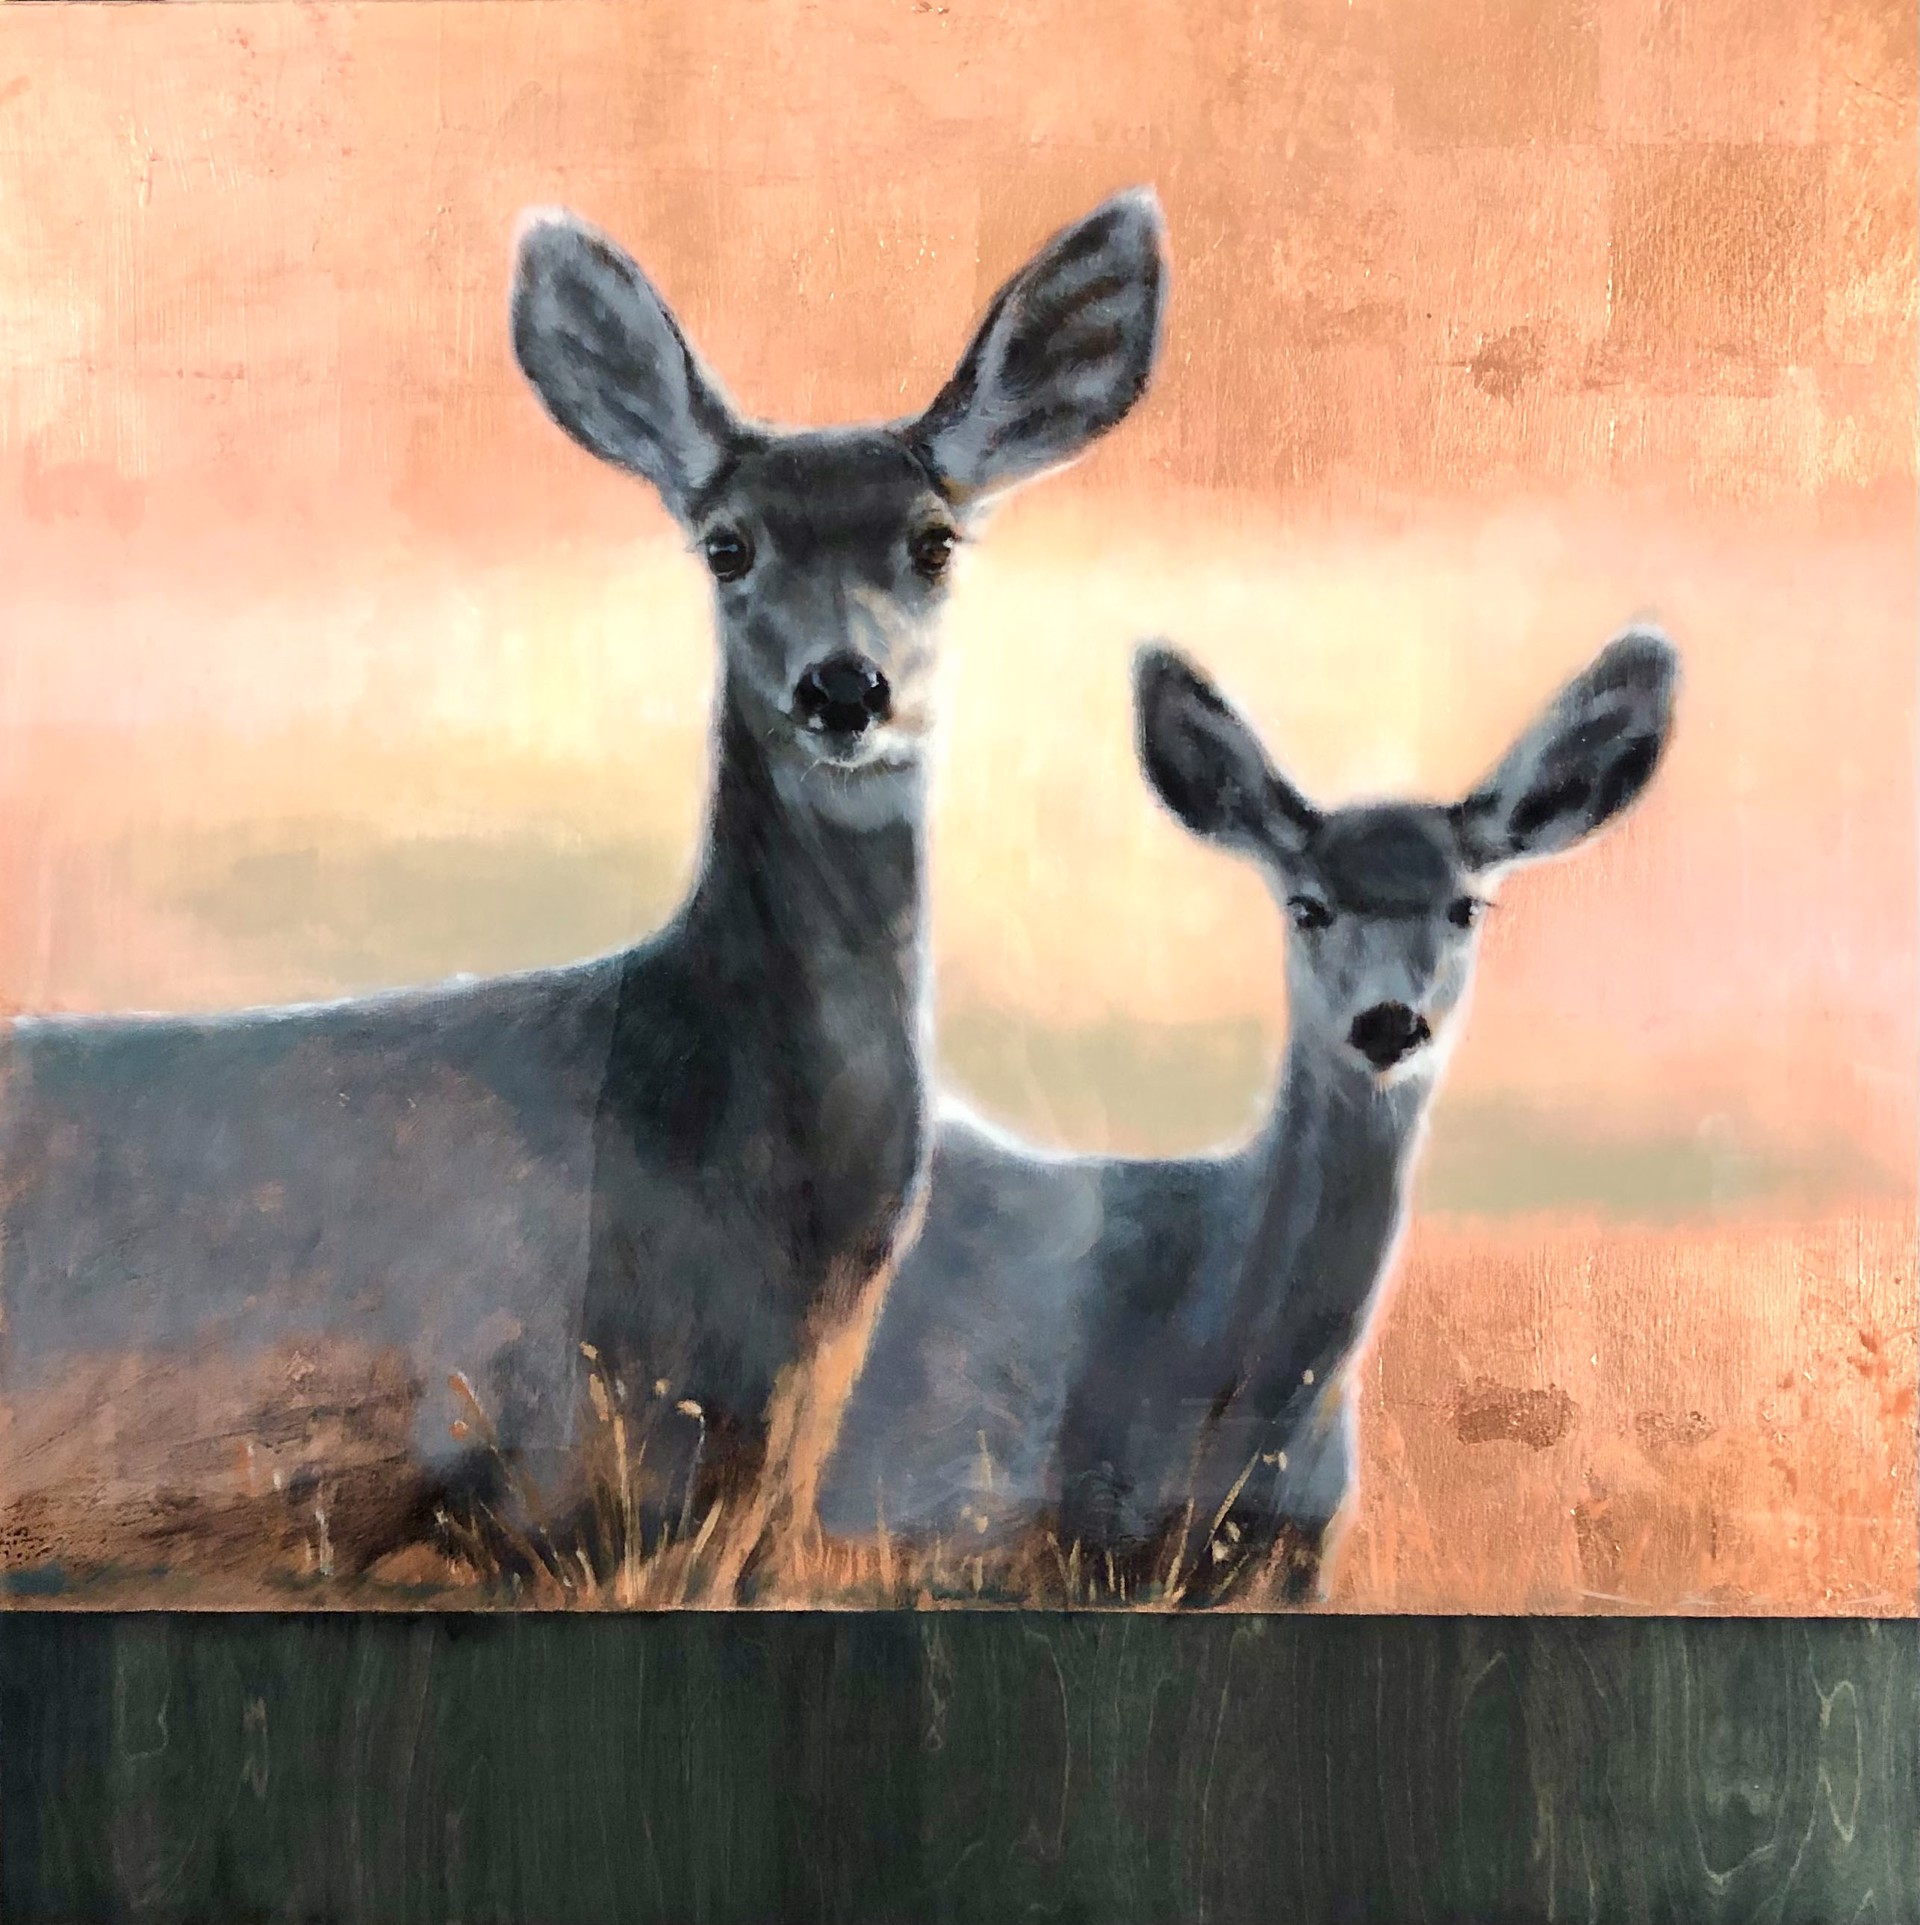 Original Artwork Featuring Mule Deer With Contemporary Graphic Background And Copper Leaf Detail